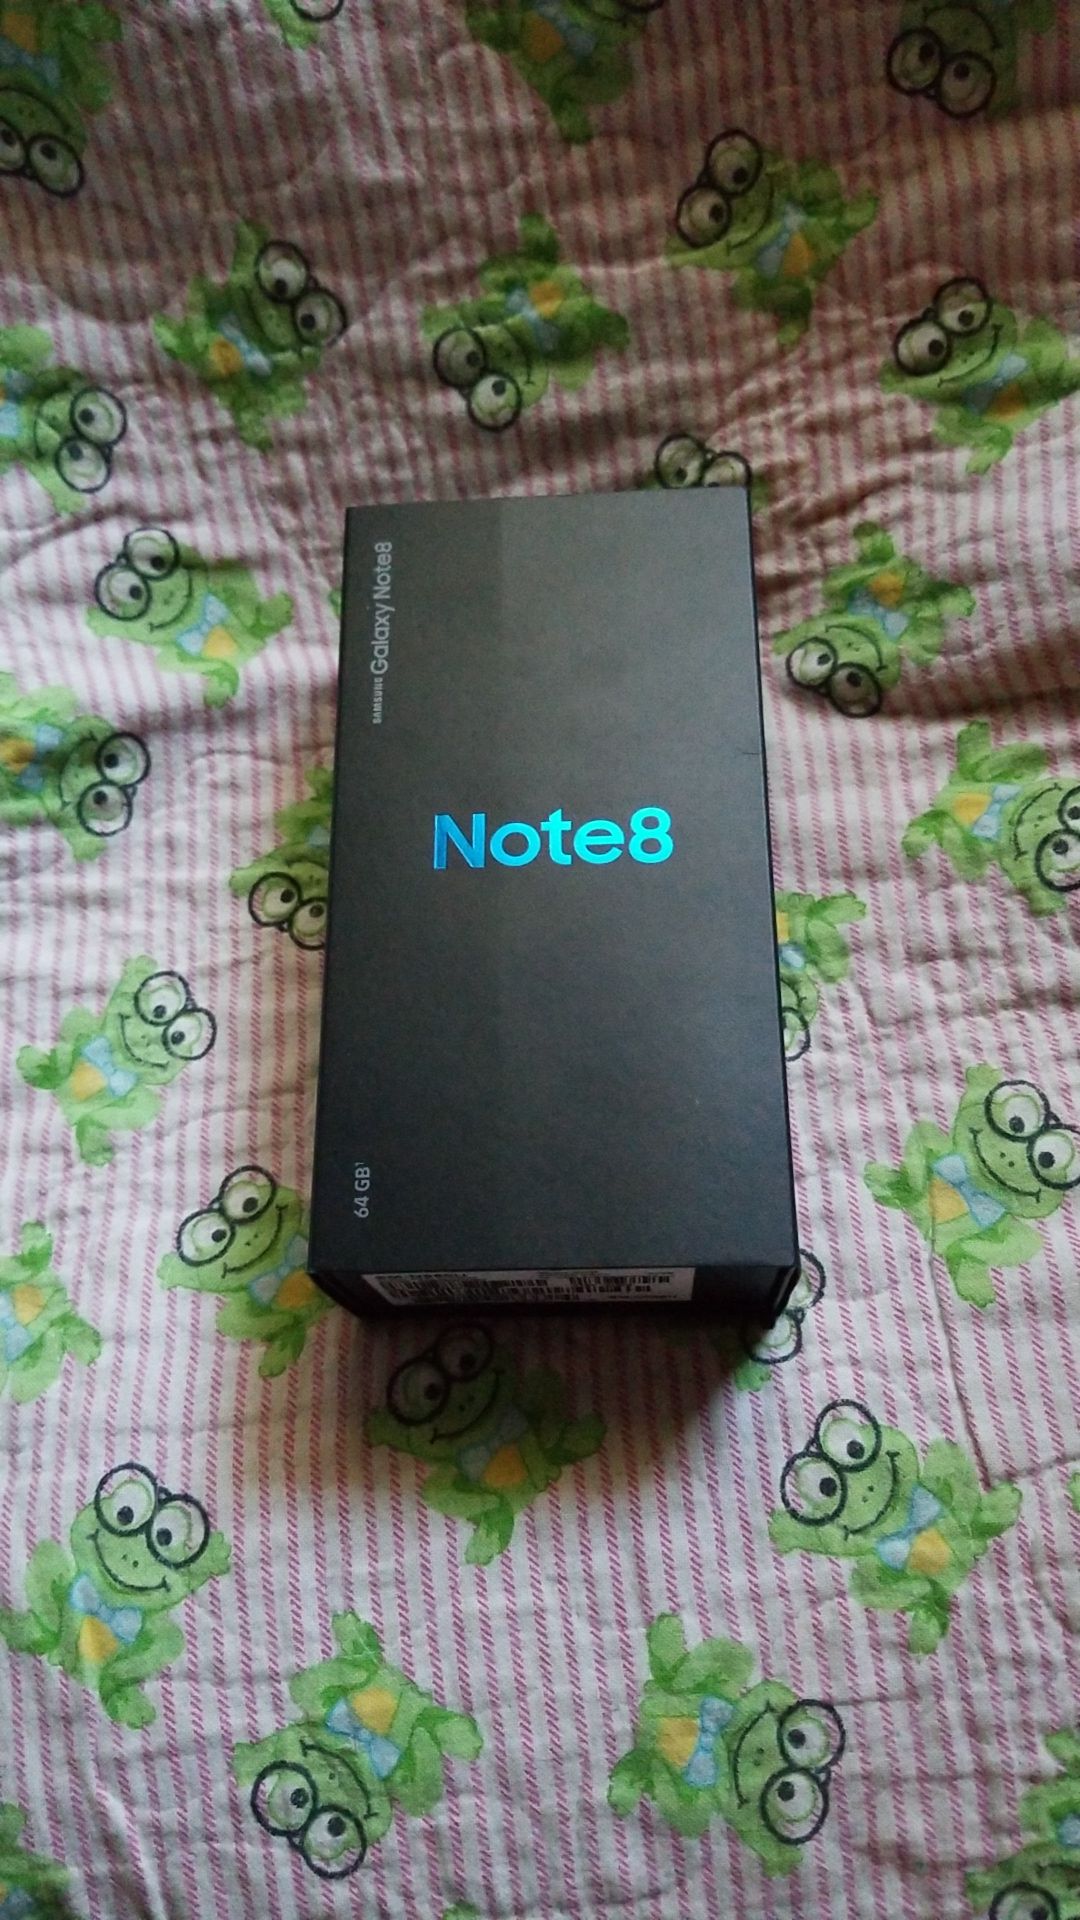 CELL PHONE. BRAND NEW SAMSUNG GALAXY NOTE8